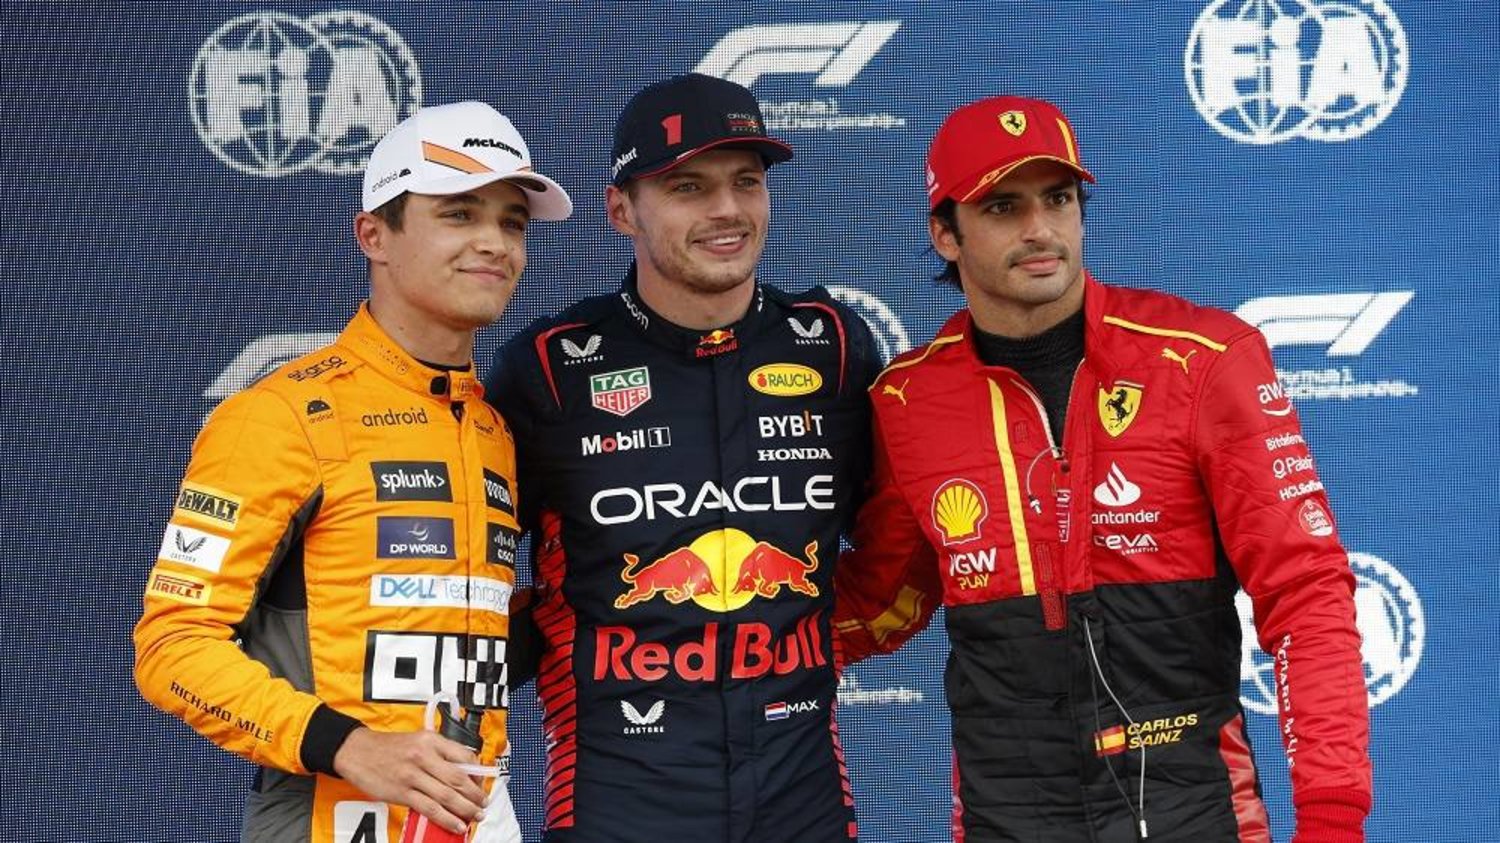 Red Bull driver Max Verstappen of the Netherlands, center who clocked the fastest time, poses with Ferrari driver Carlos Sainz of Spain, right, 2nd fastest and McLaren driver Lando Norris of Britain, 3rd fastest after the Formula One qualifying session at the Barcelona Catalunya racetrack in Montmelo, just outside of Barcelona, Spain, Saturday, June 3, 2023. (AP) 